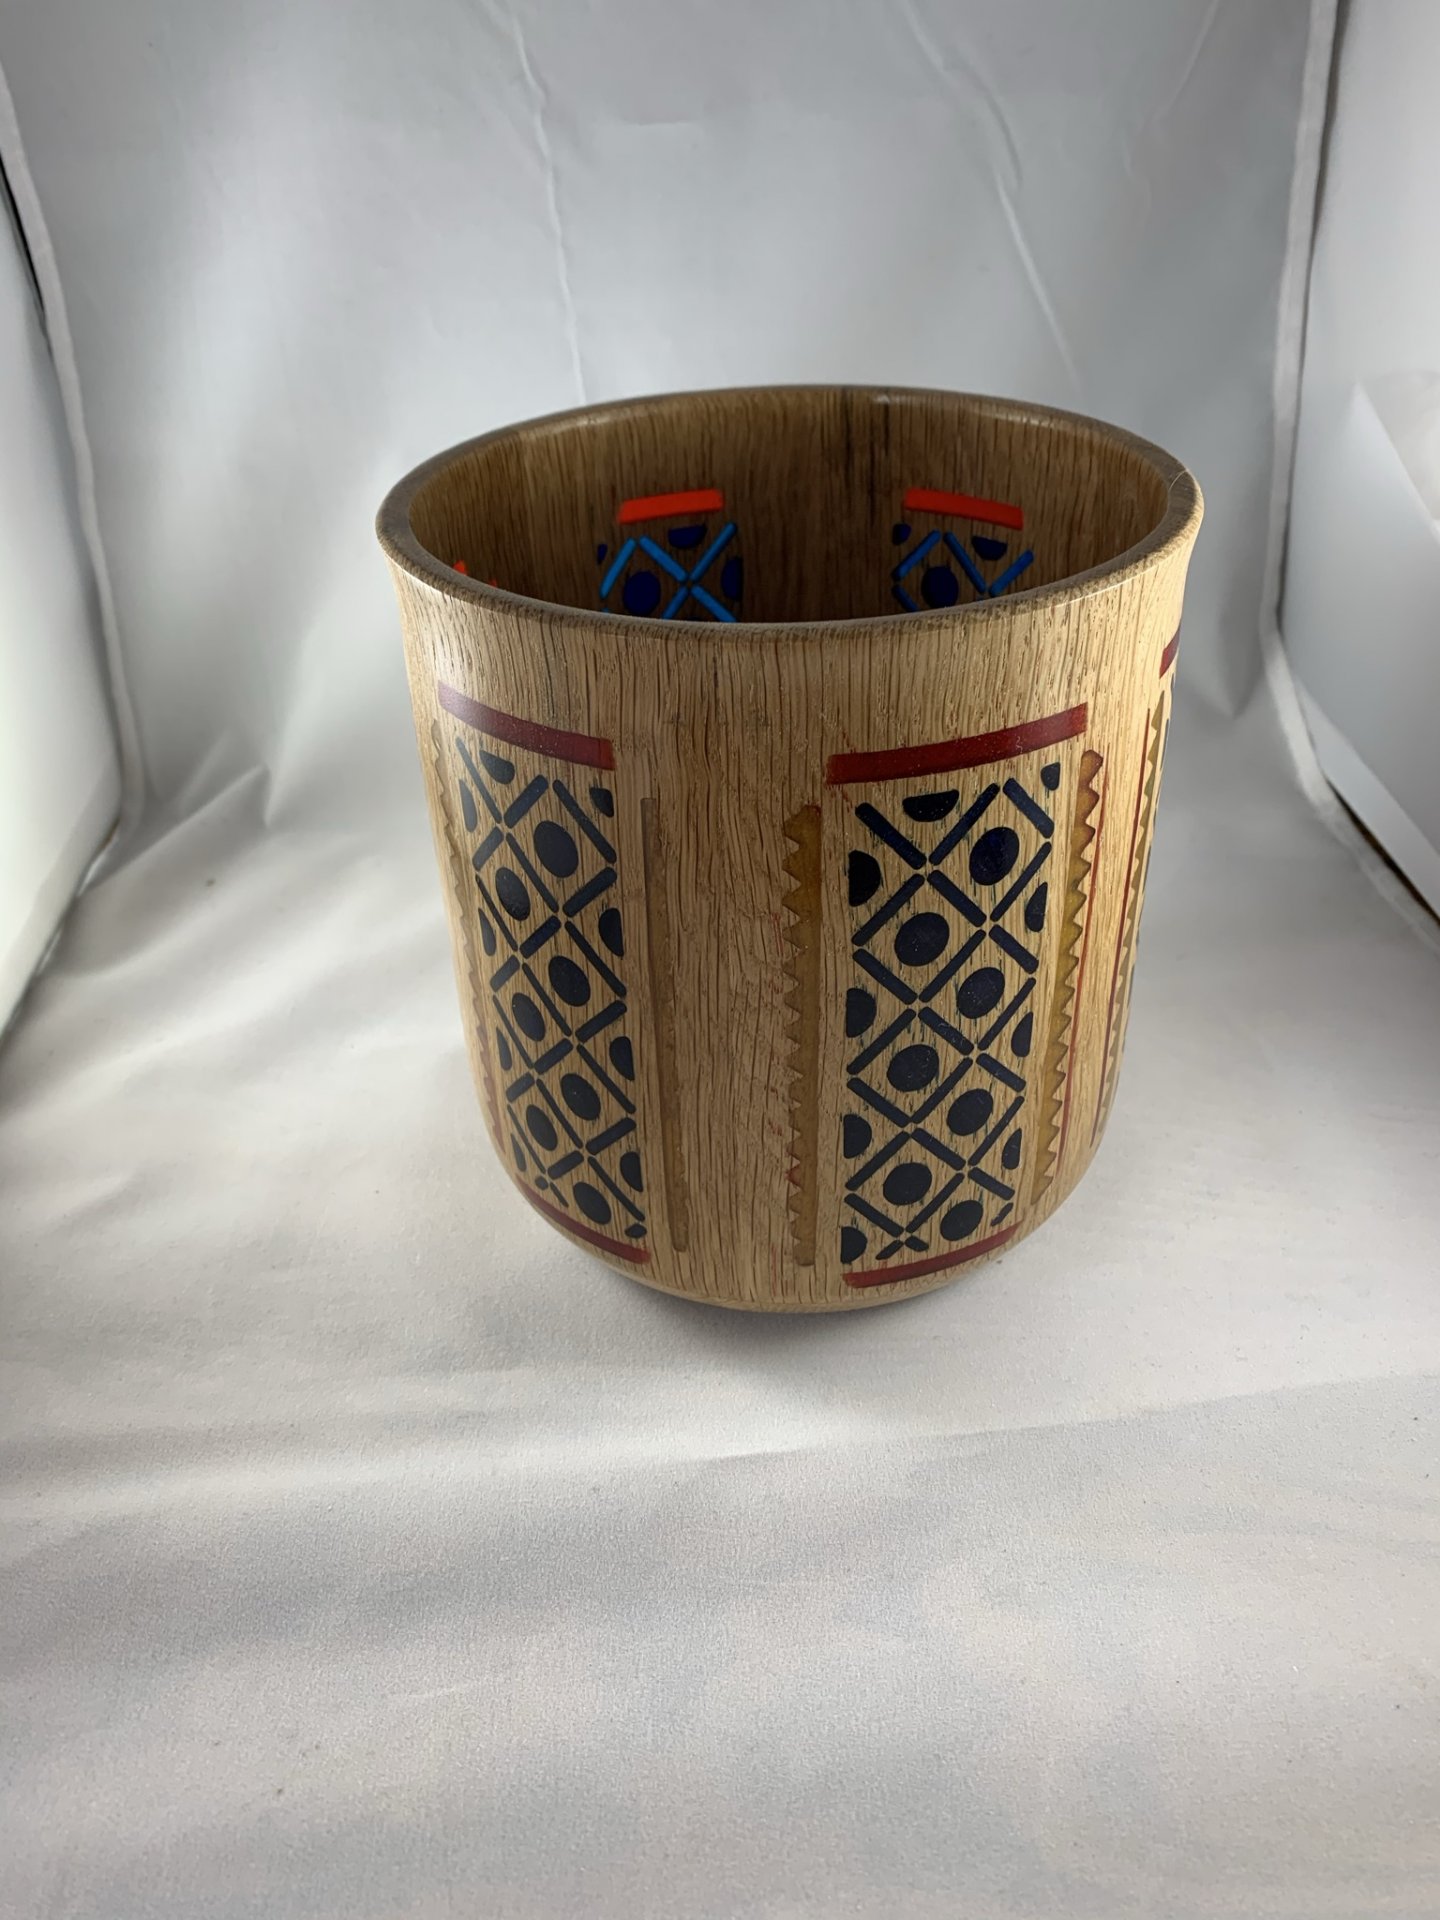 White oak vessel with translucent resin inlays